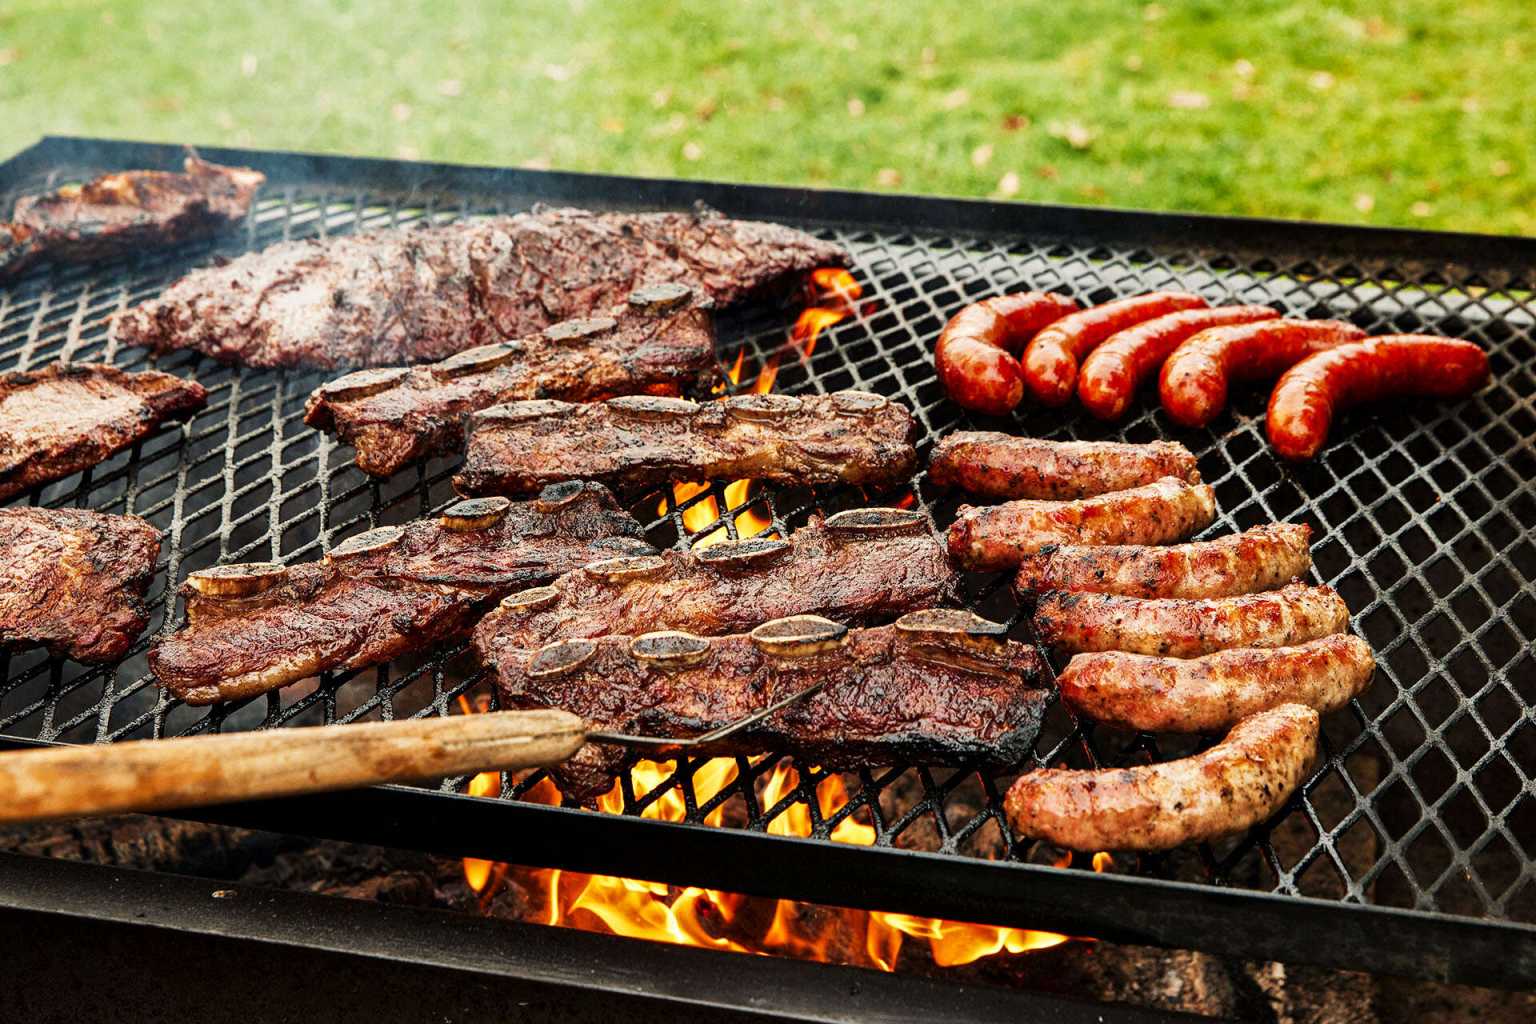 A rustic barbecue with a mixed grill twist